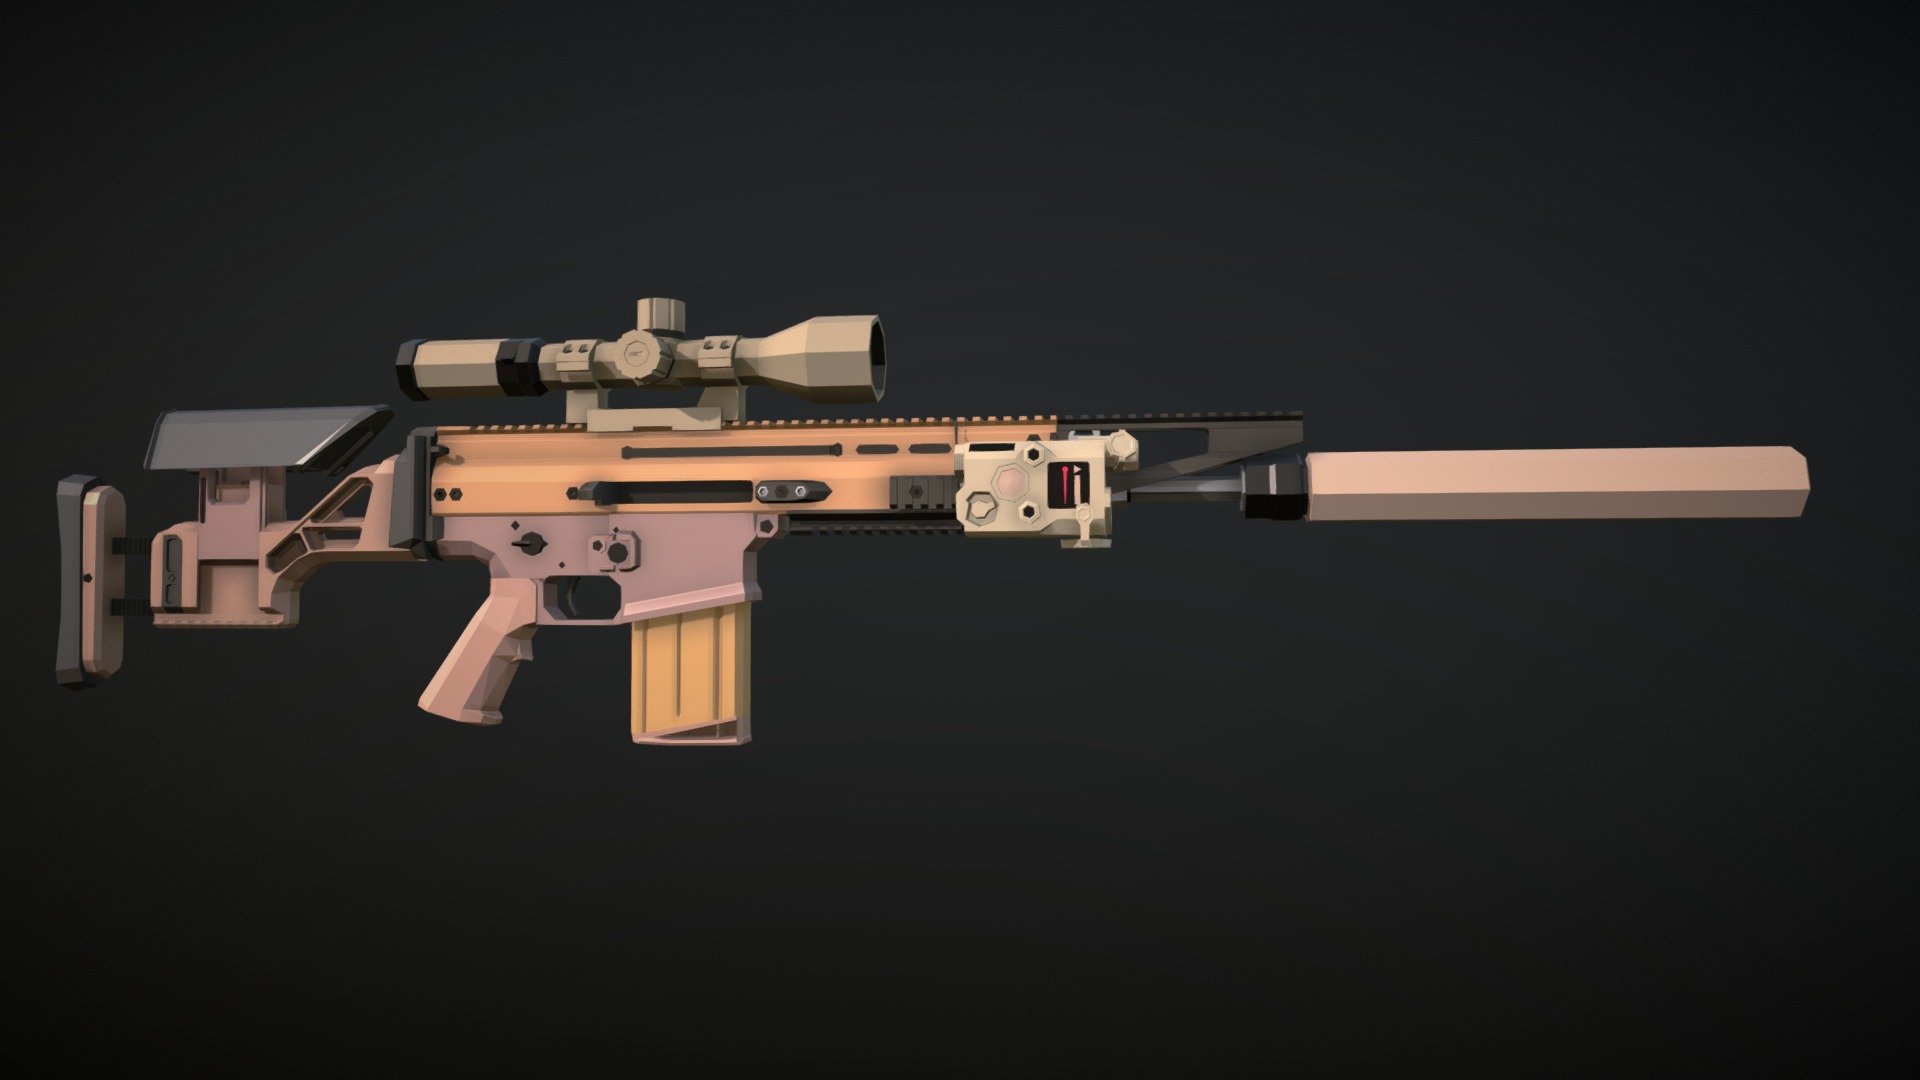 model of the FN SCAR-H, with the fixed adjustable stock of the SCAR SSR/Mk20, a PEQ-15, a magnification adjustable scope, a top rail extension part and a suppressor. This entire setup was heavily inspired by one picture of a US Special Forces soldier's rifle, and it took me way too much time to find out what all the attachments were.

for anyone trying to make the scope work in a realistic way in a game, it's a 3.5x to 21x magnification sight, I included the reticle 3d model